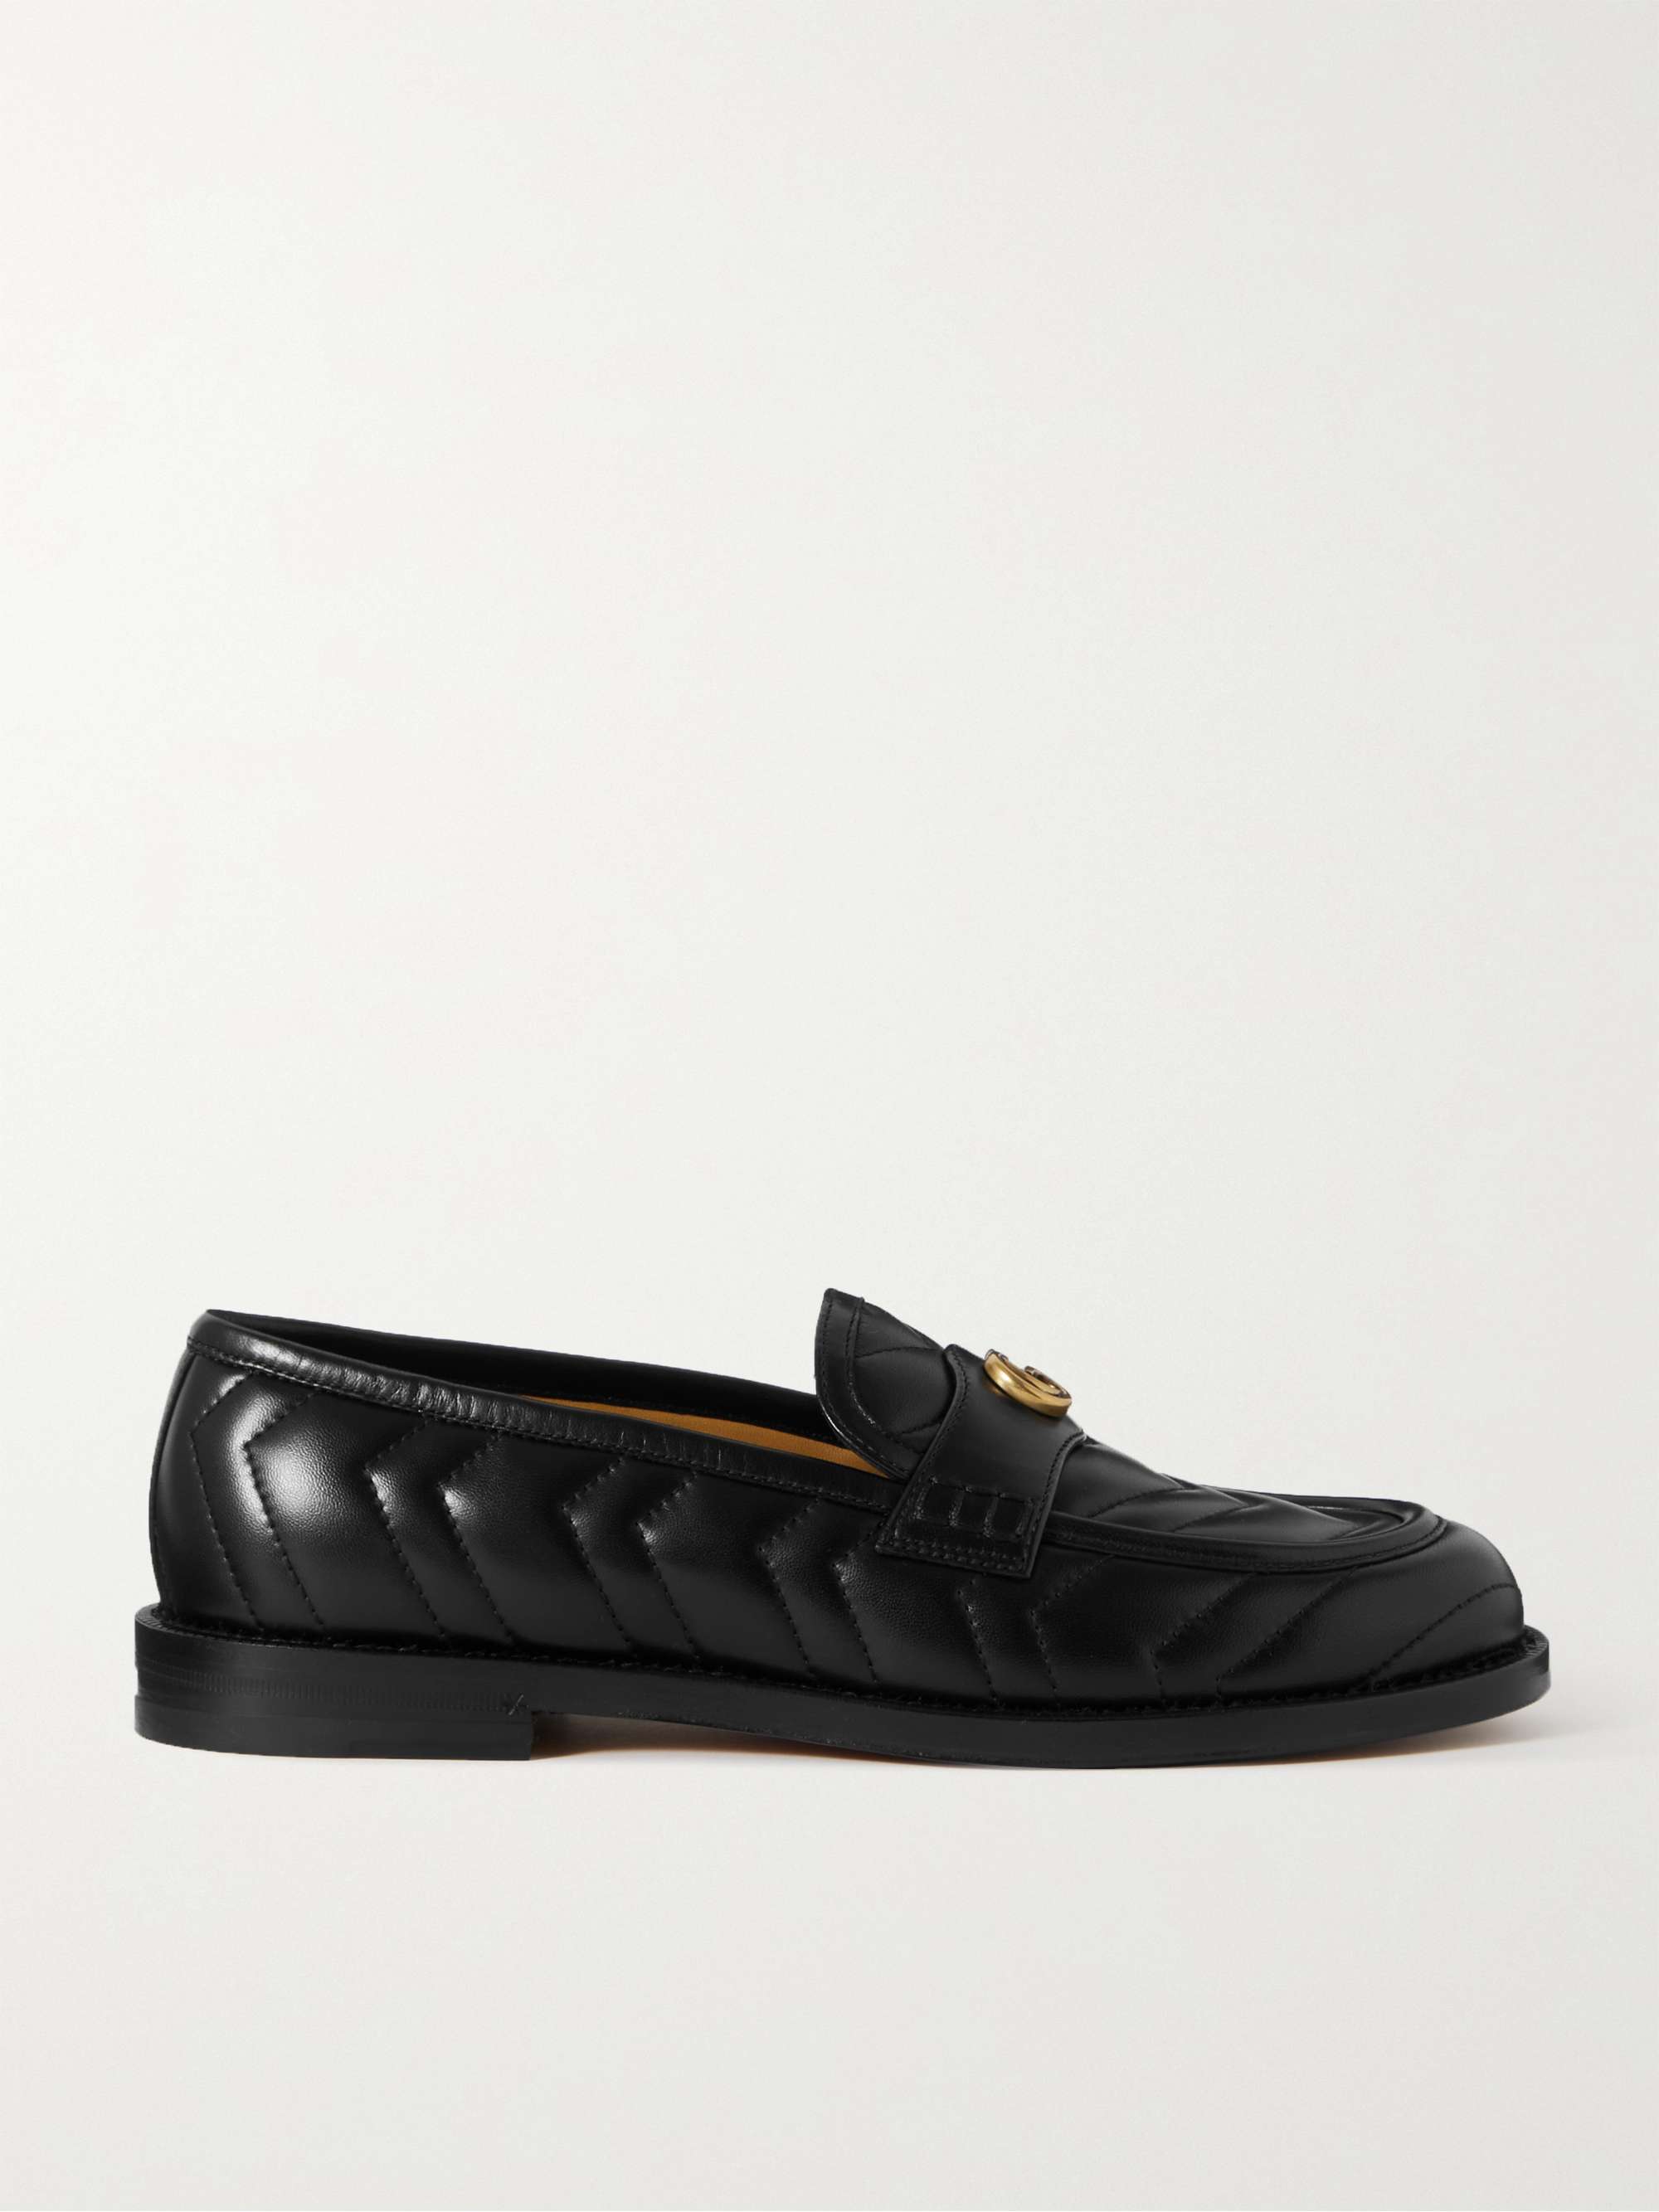 GUCCI Marmont Logo-Detailed Quilted Leather Loafers